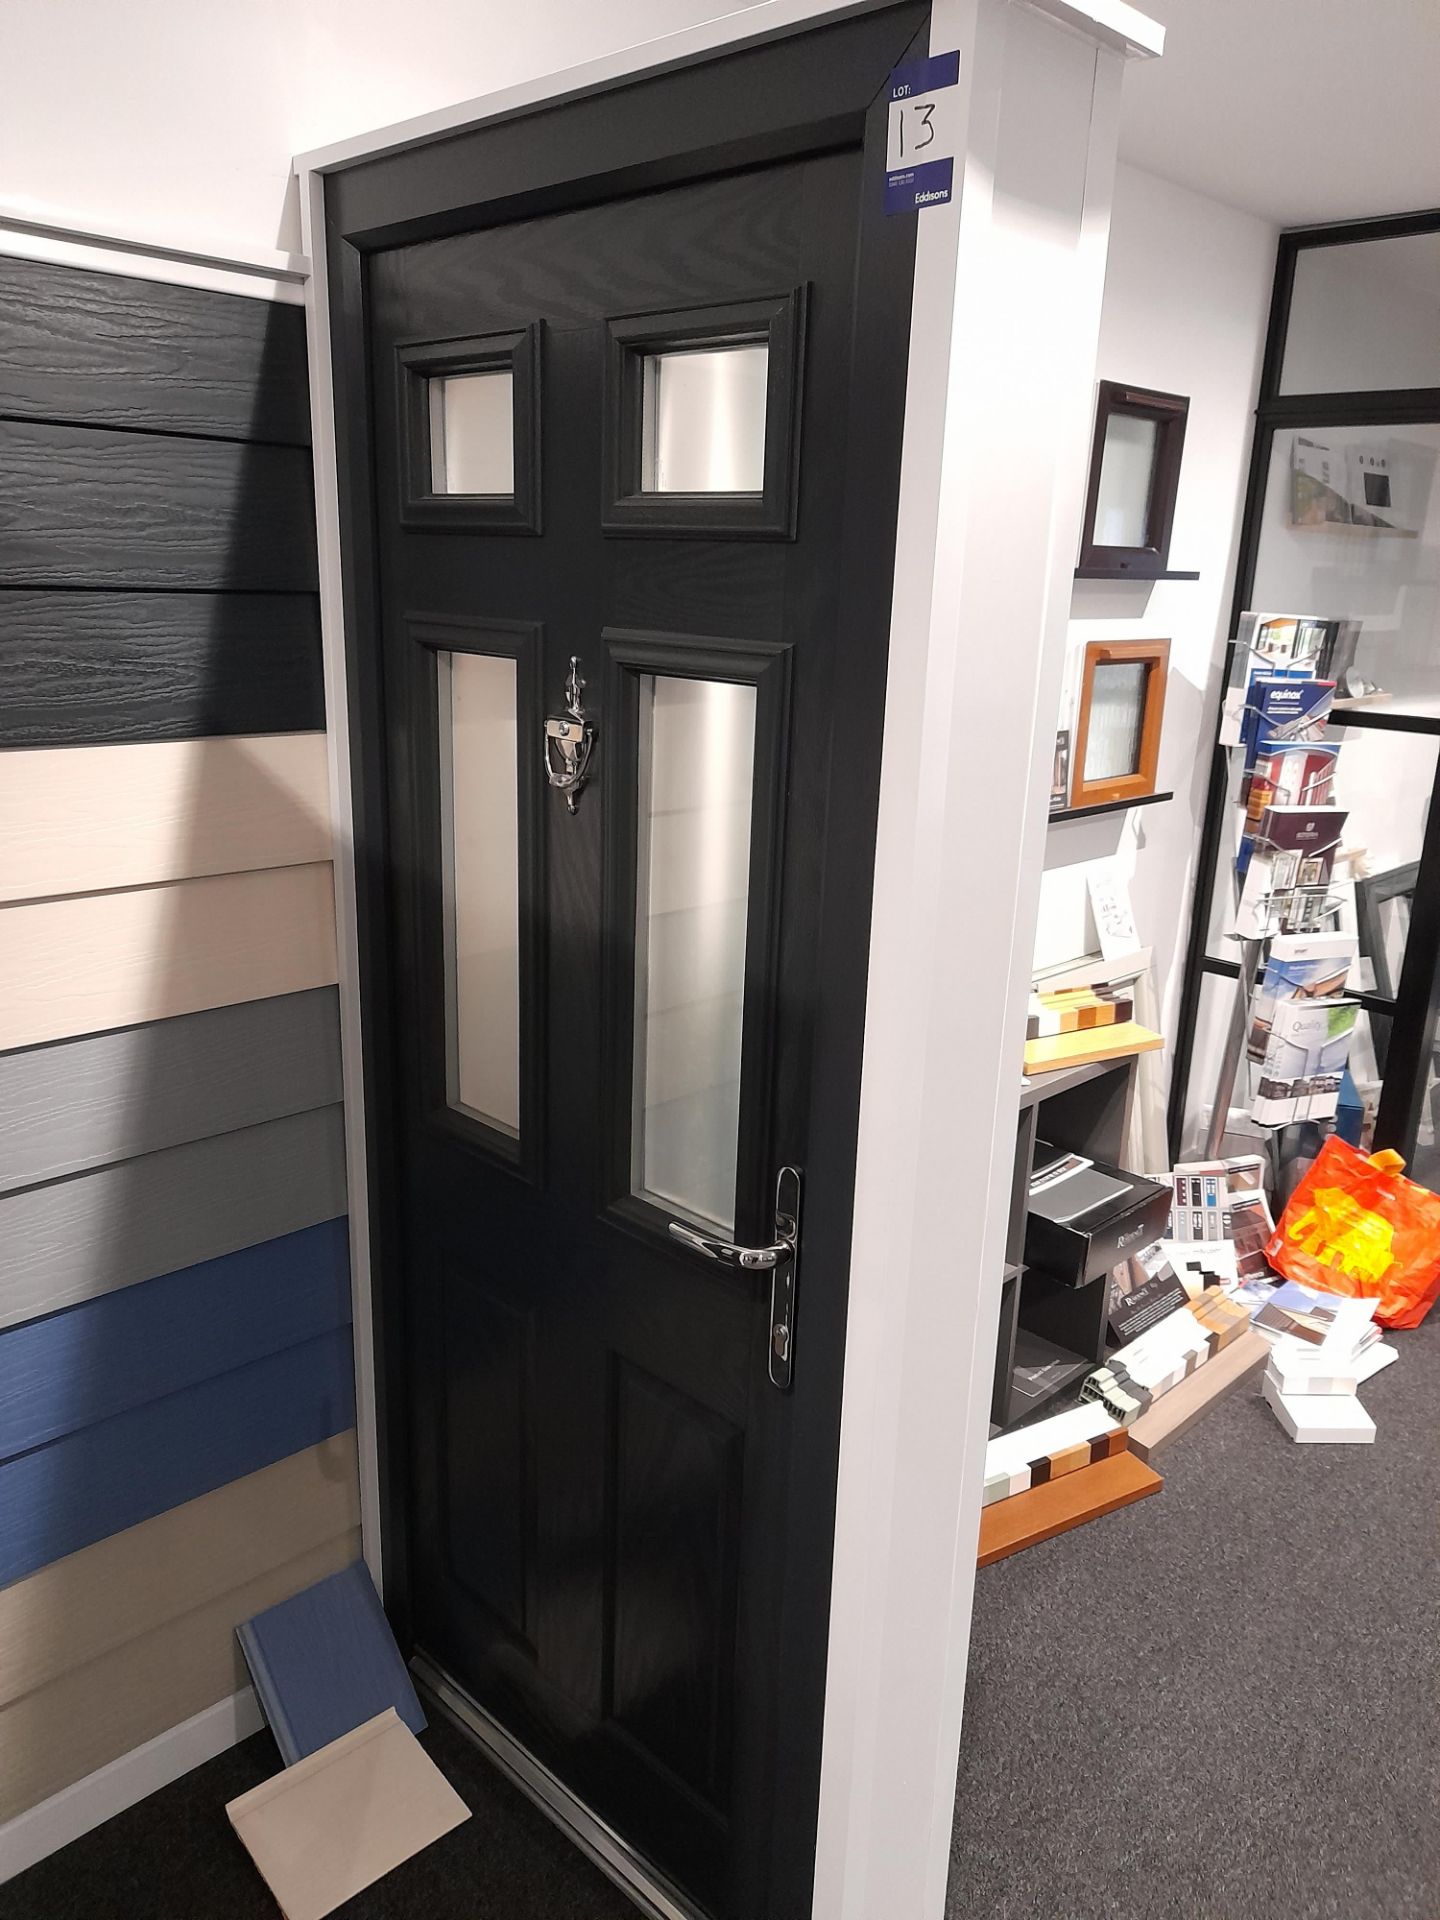 Black on White Eurocell Hathersage door in white frame, open in, chrome handle, letterbox and